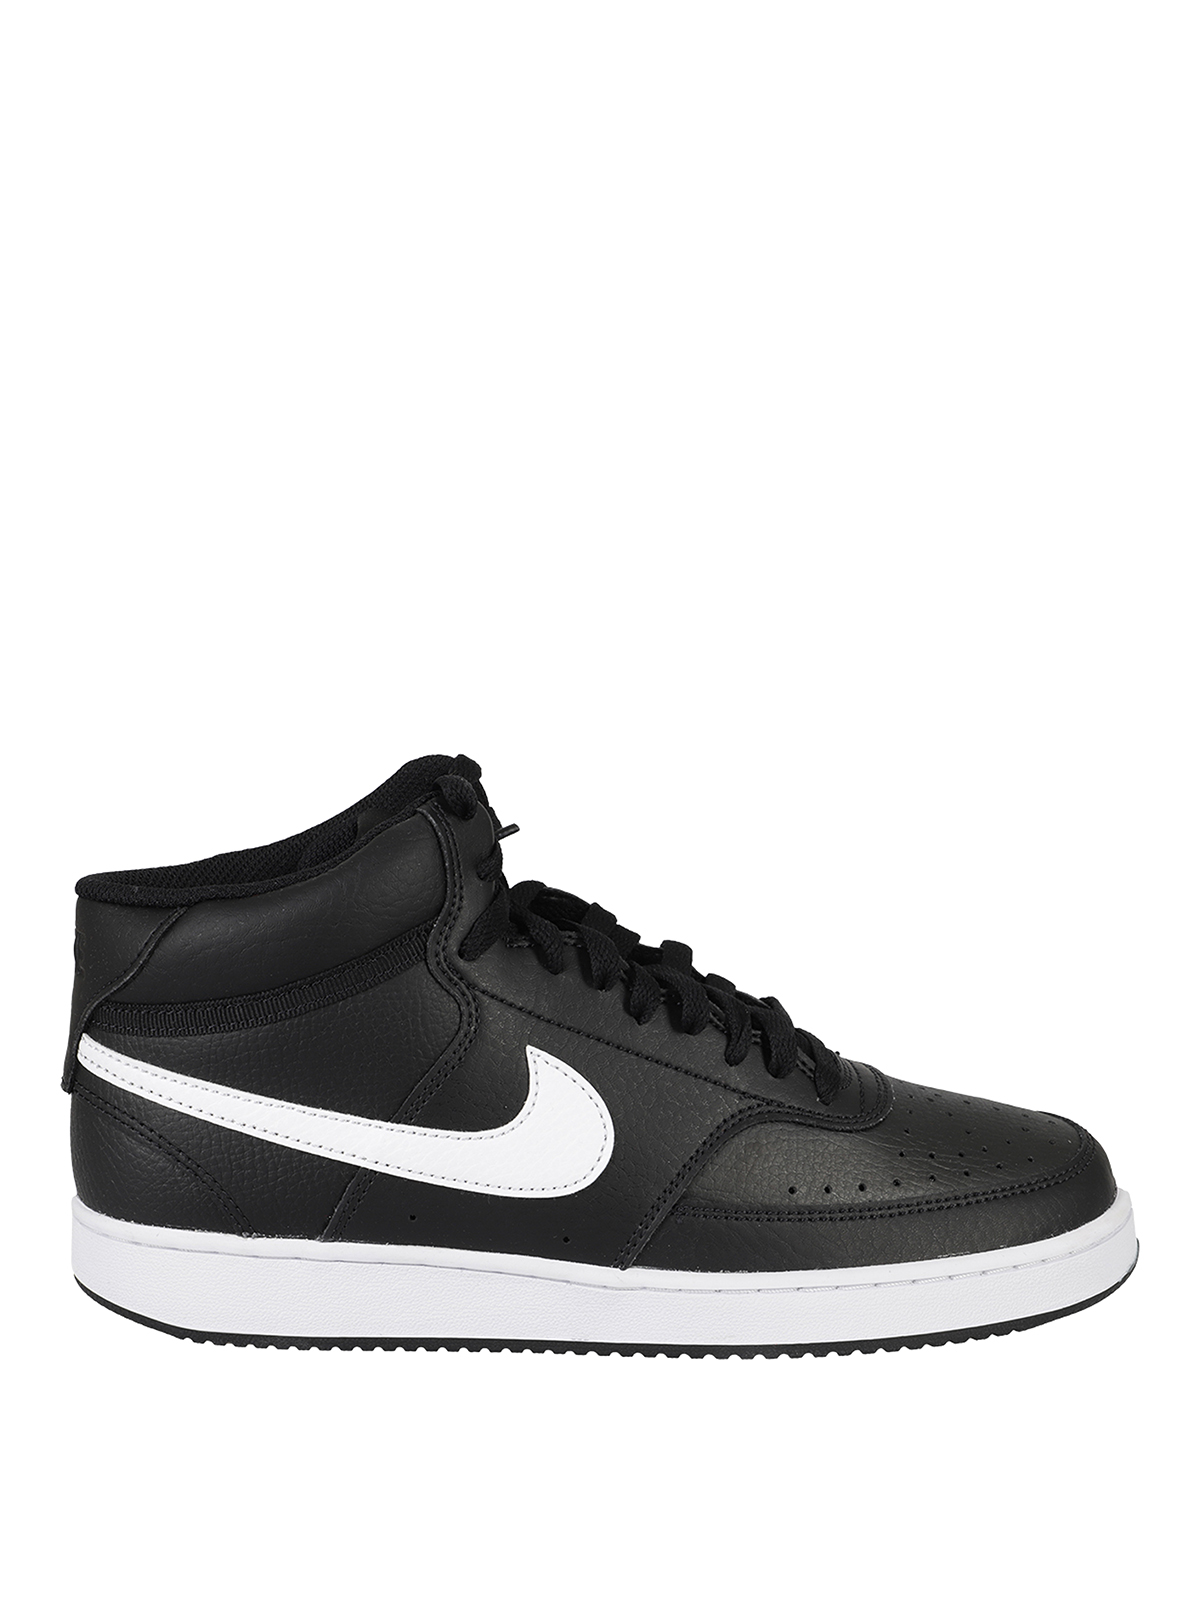 Nike - Court Vision Mid sneakers - trainers - CD5466001 | iKRIX.com